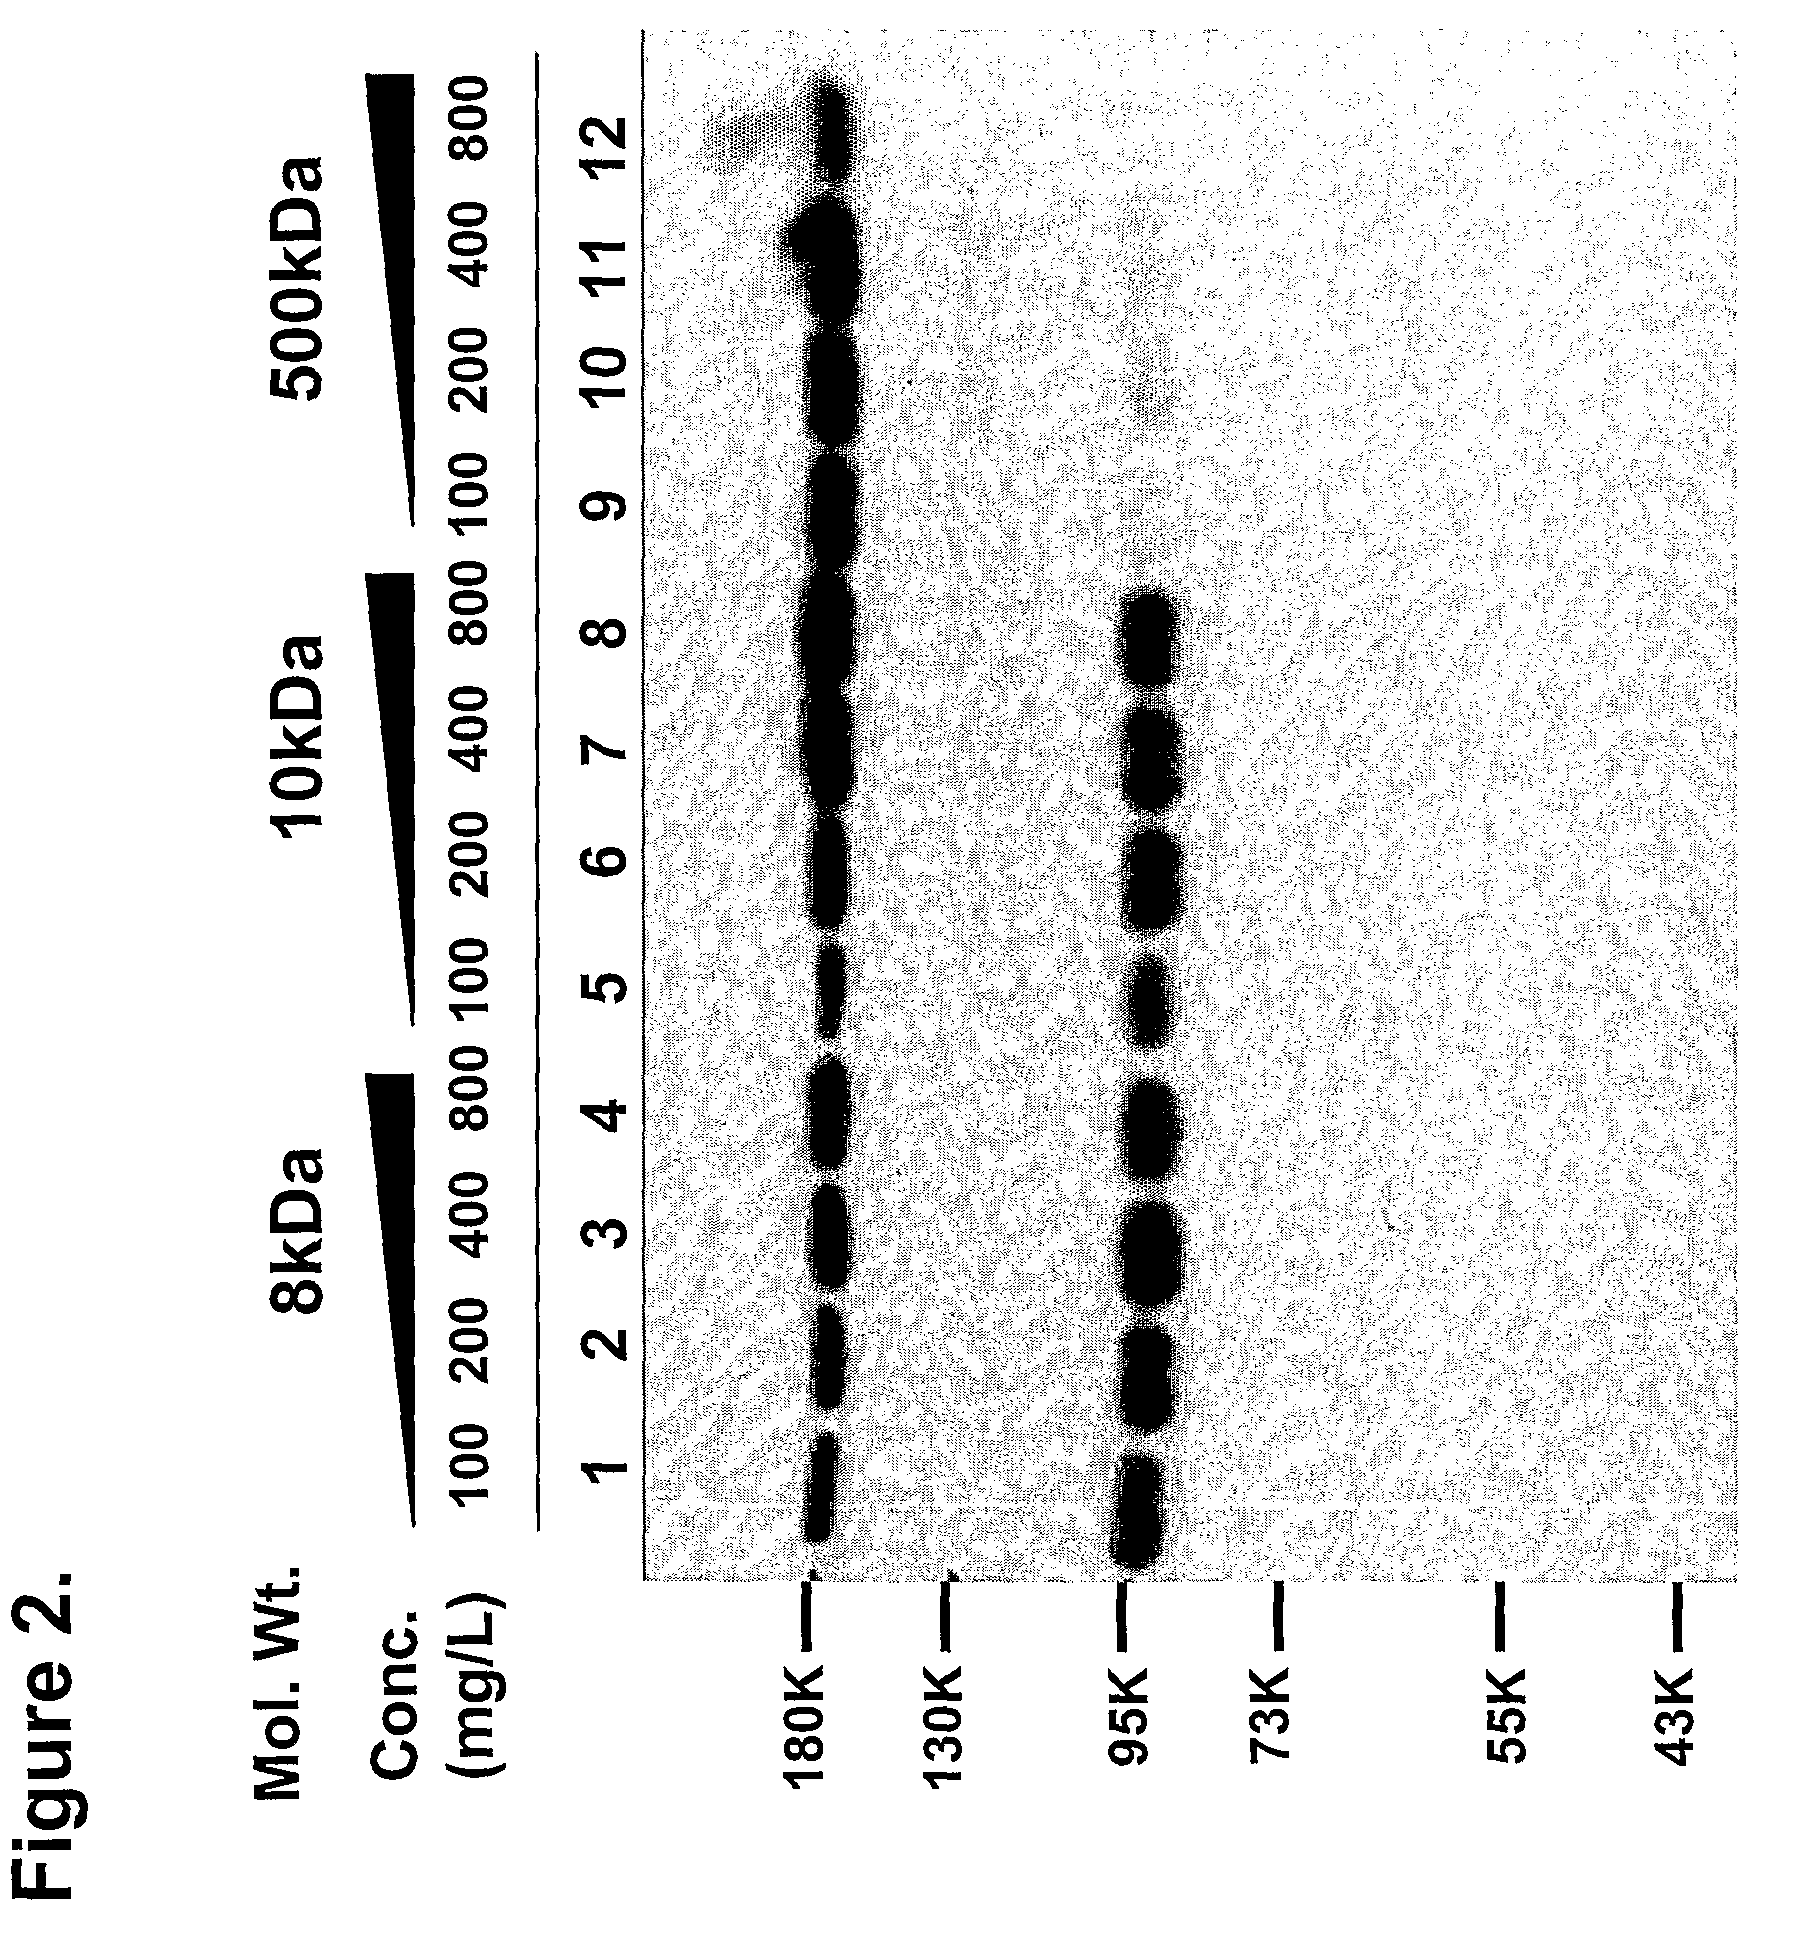 Process for producing and purifying factor VIII and its derivatives